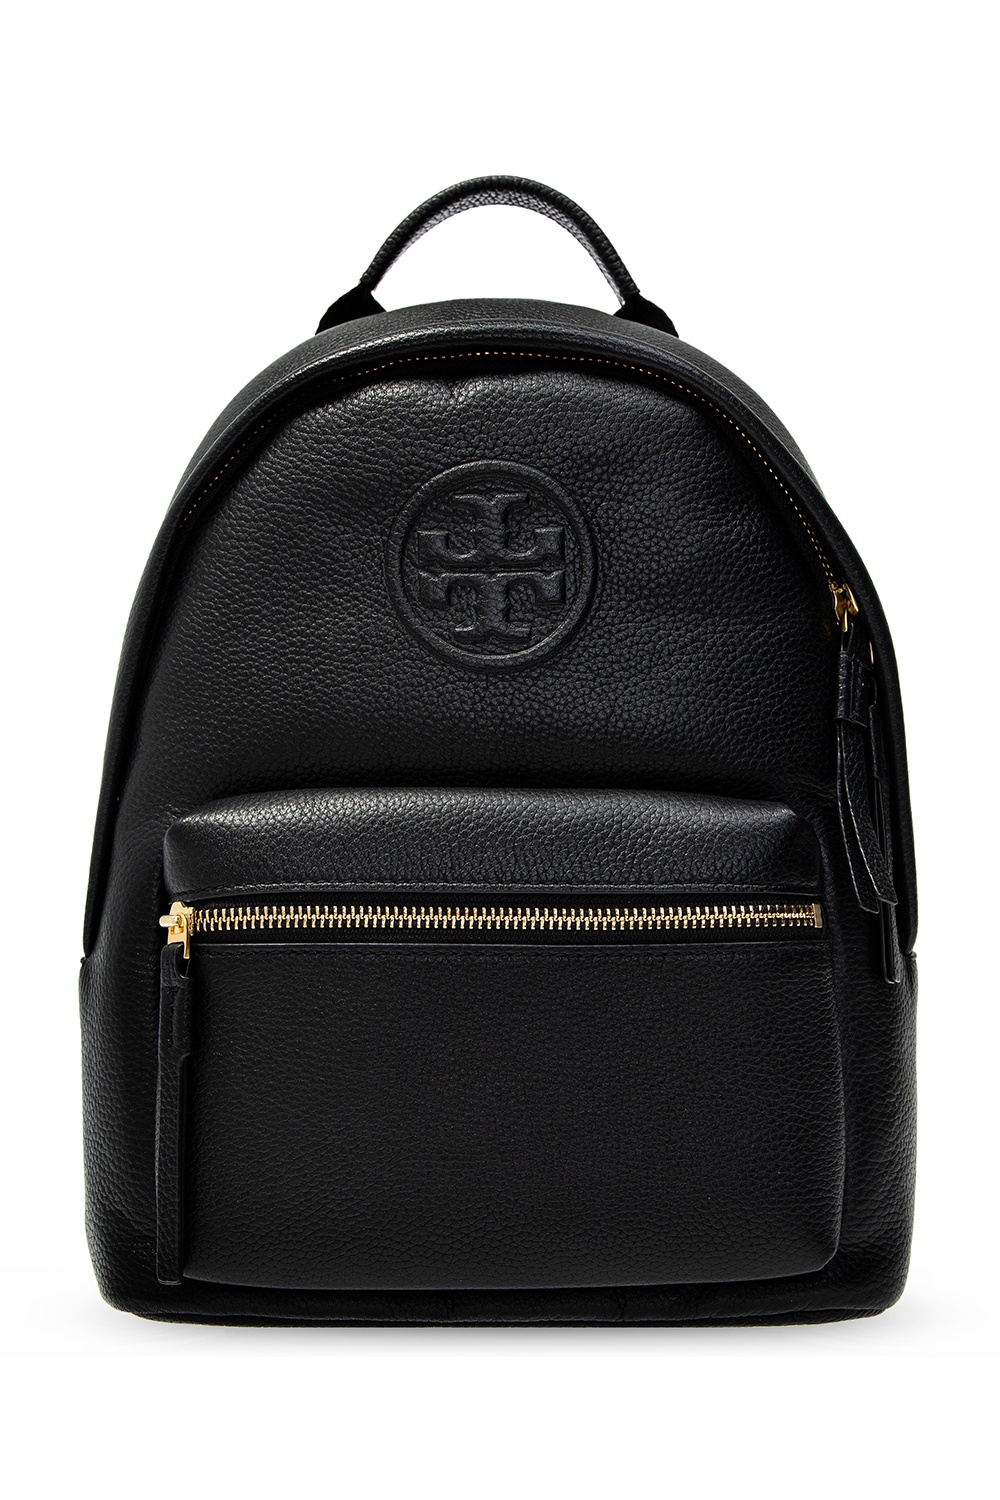 TORY BURCH: Perry bag in textured leather - Black